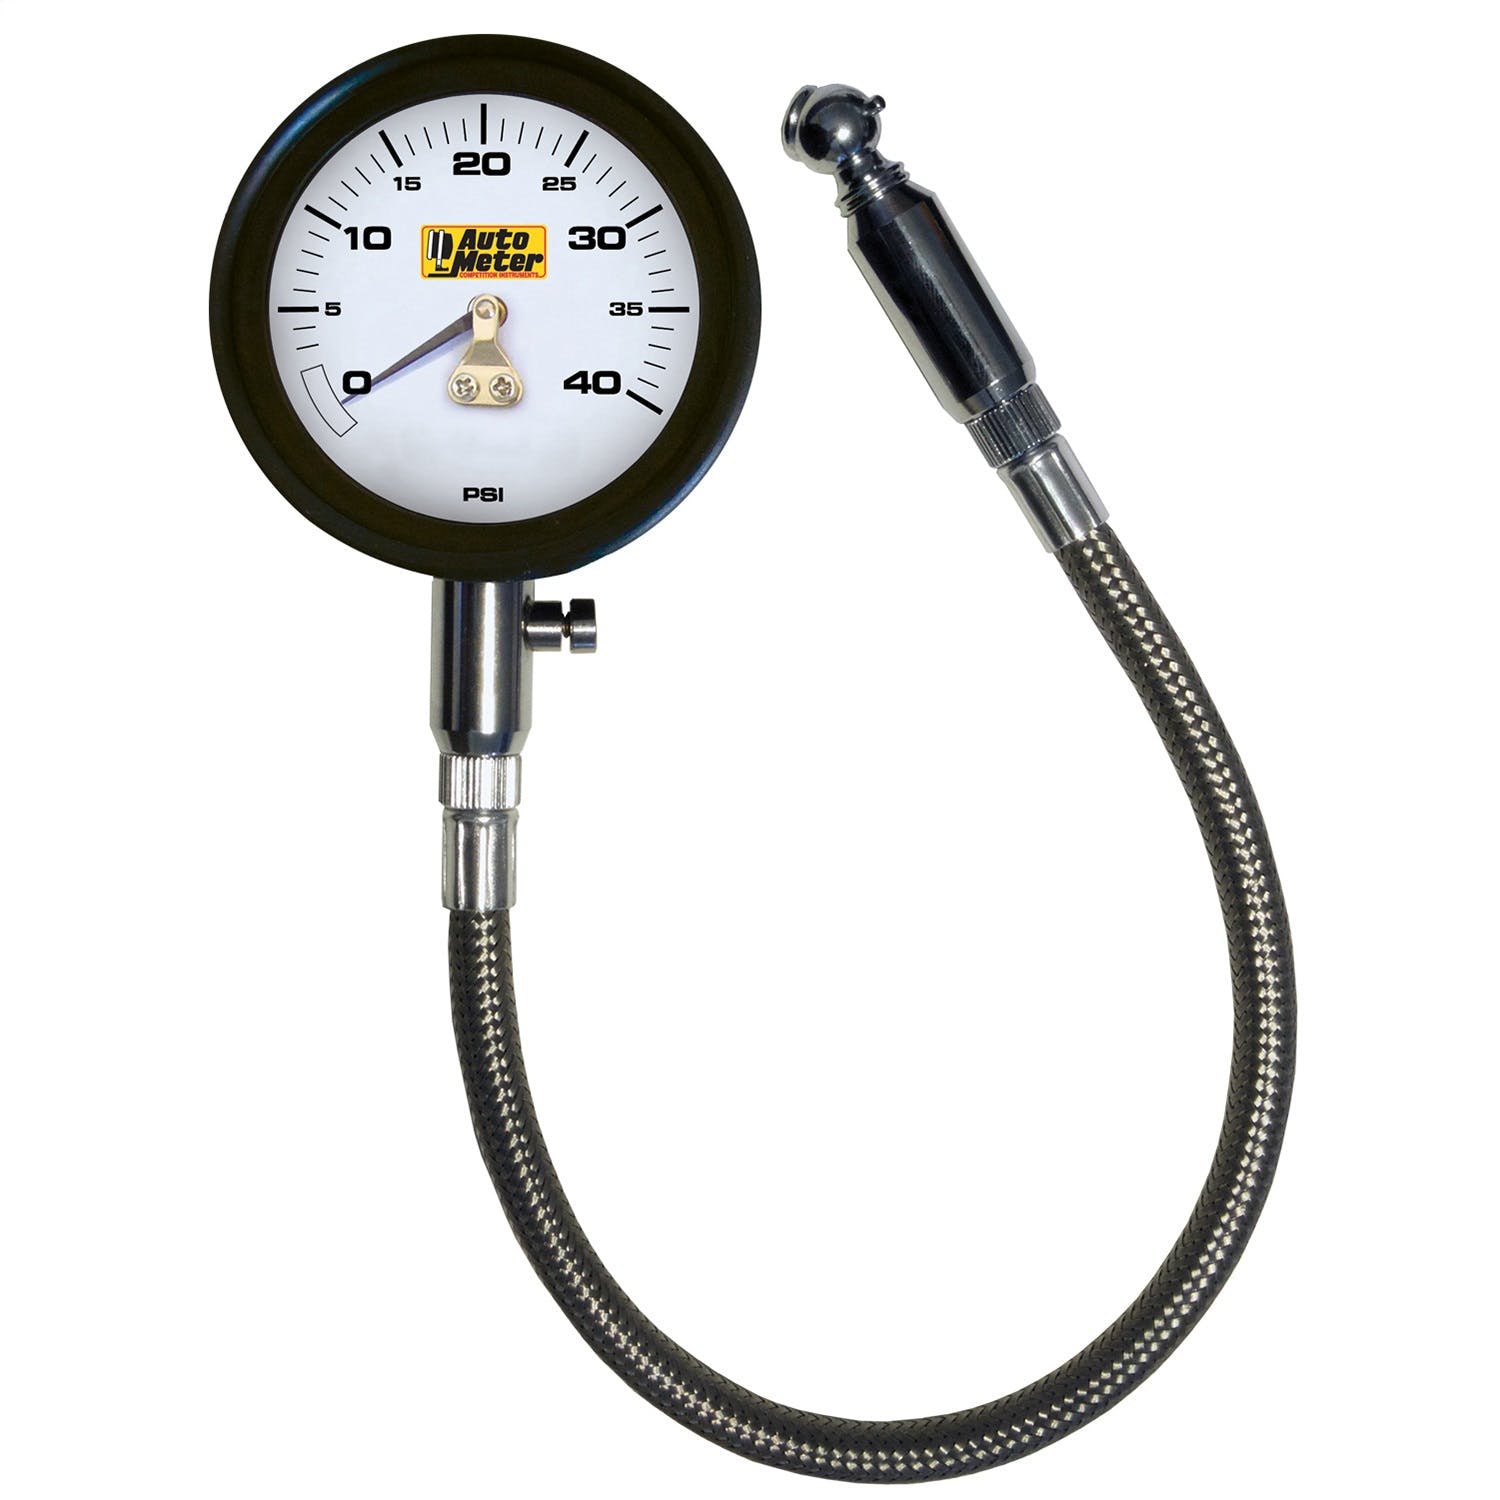 AutoMeter Products 2162 Professional-Grade Tire Pressure Gauge (0-40 PSI)